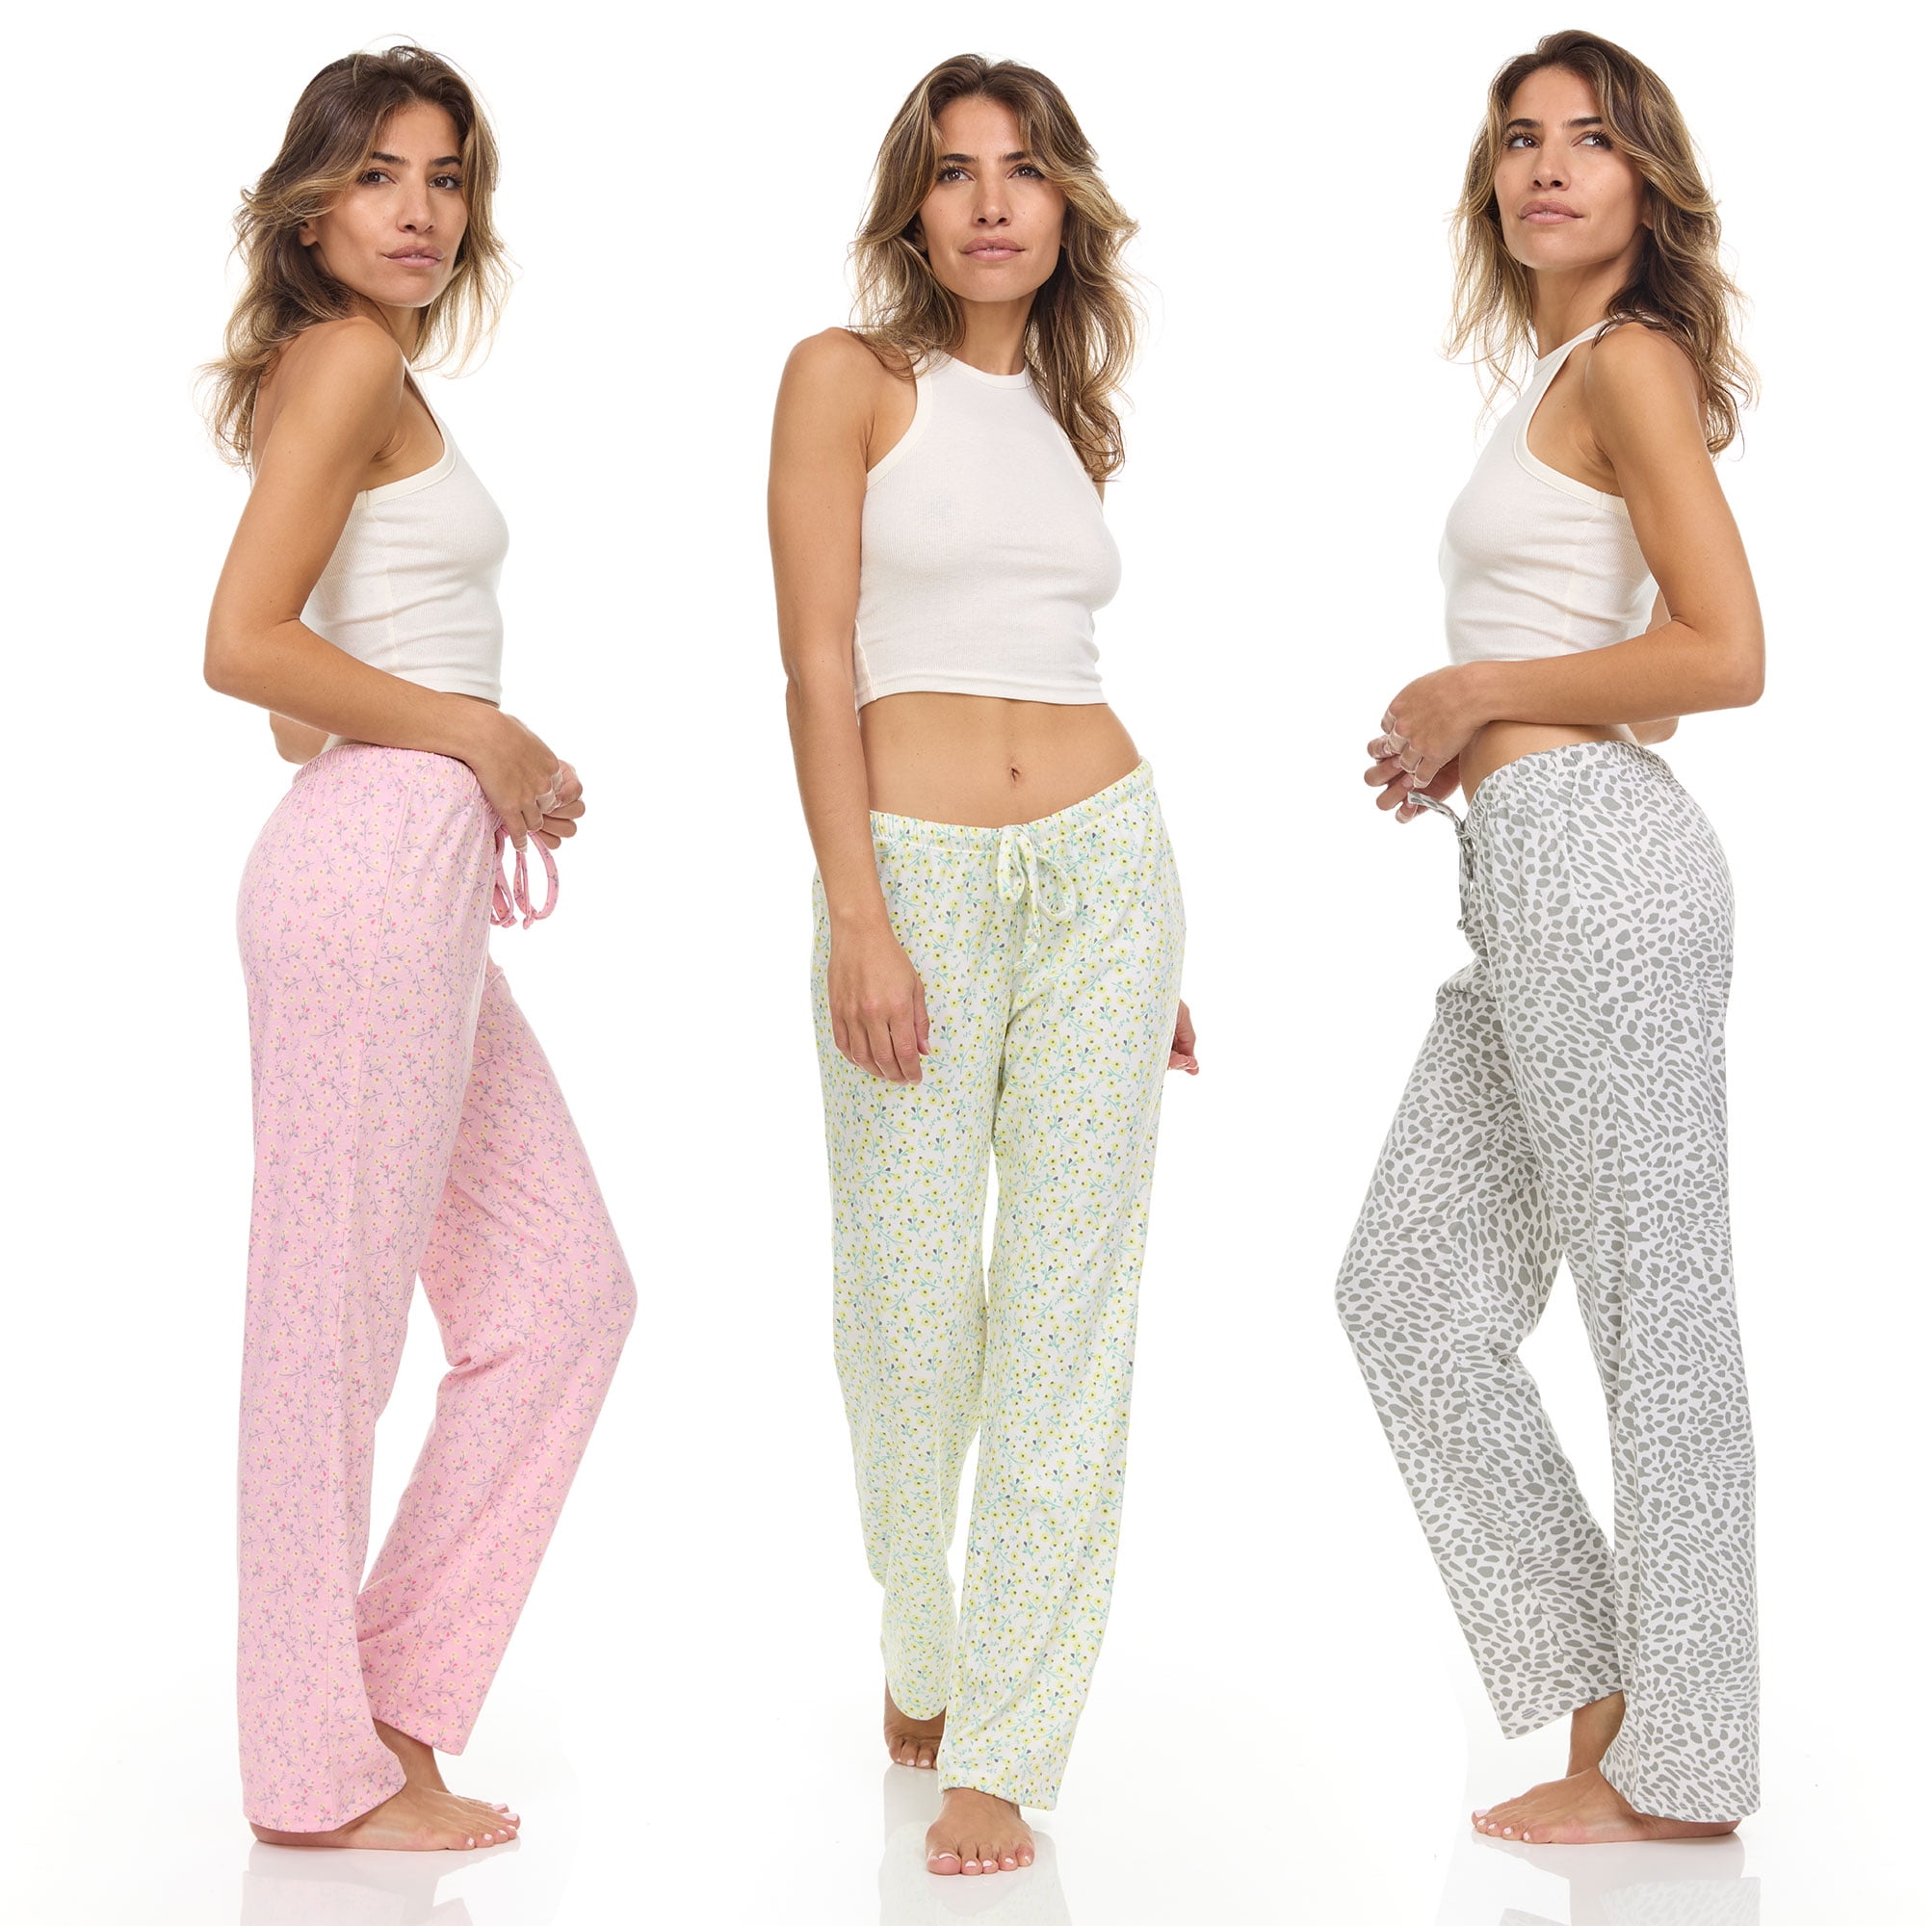 Picture of Daresay PJW-200-SET E-Yum Pnt-3Pk-2X Womens Printed Lounge Pajama Pants, Assorted Color - 2X - Pack of 3